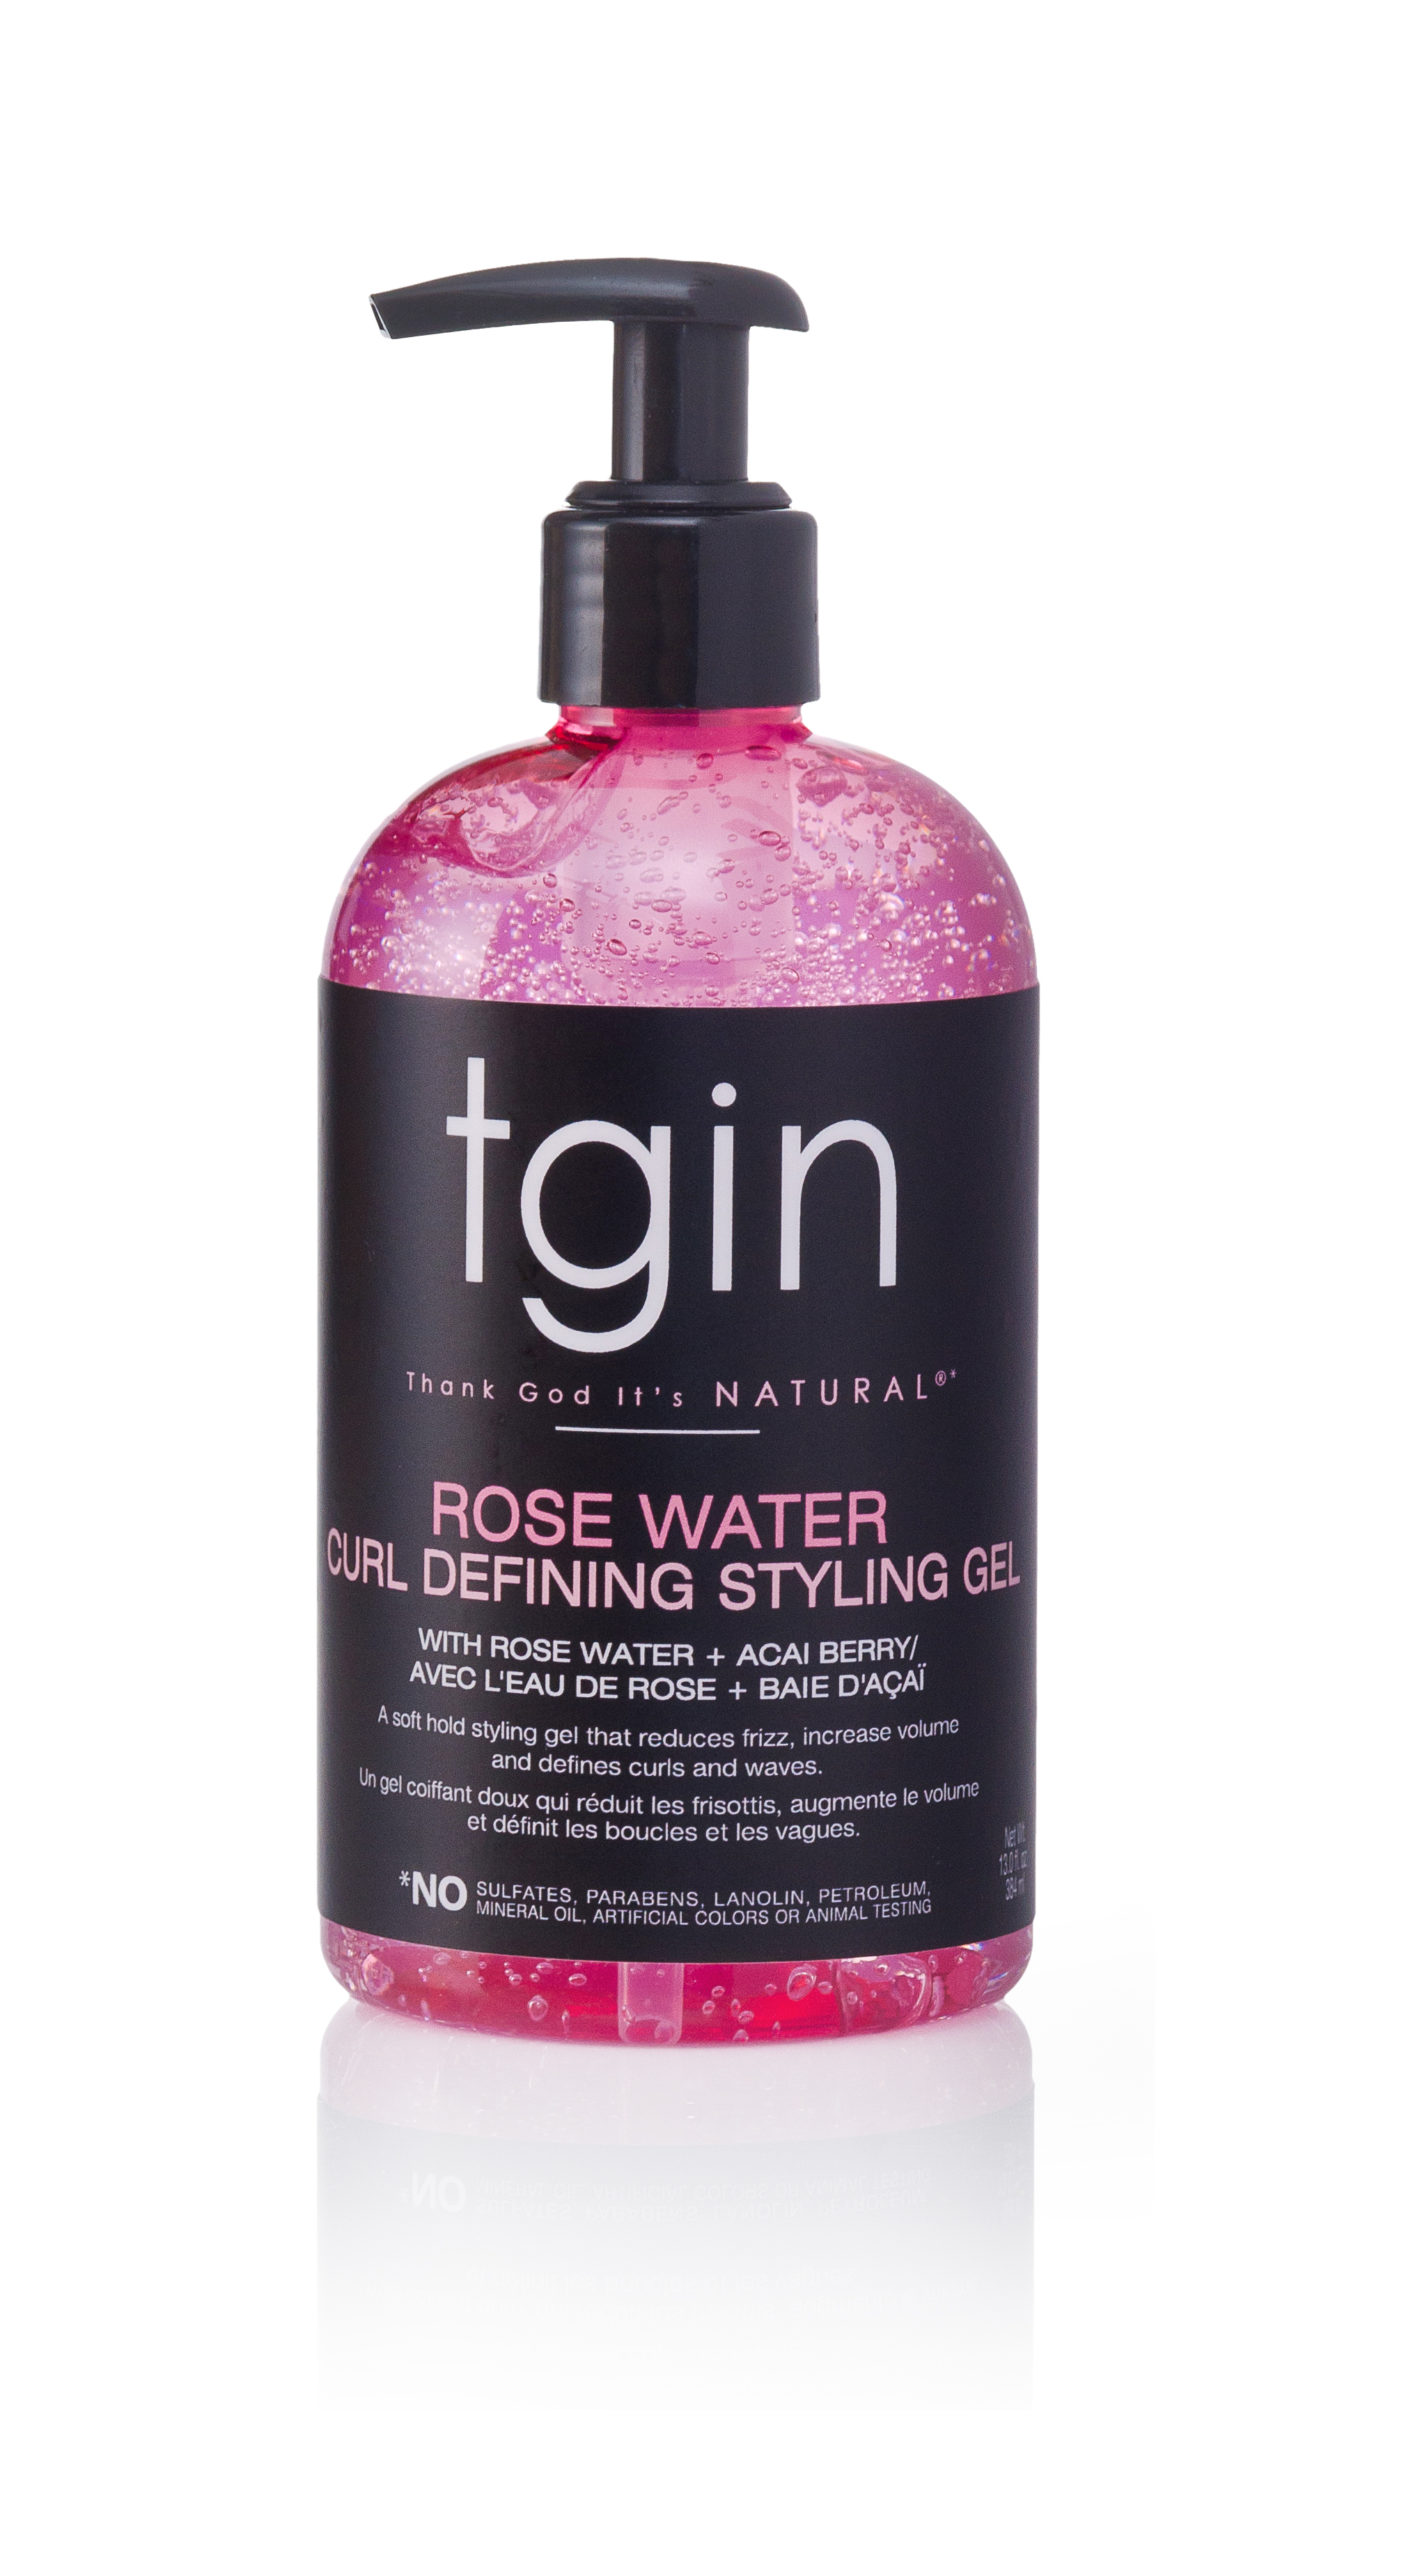 tgin Rose Water Defining Styling Gel for Natural hair - Curls - Waves - Low porosity hair - Fine hair 13OZ 13 Ounce (Pack of 1)